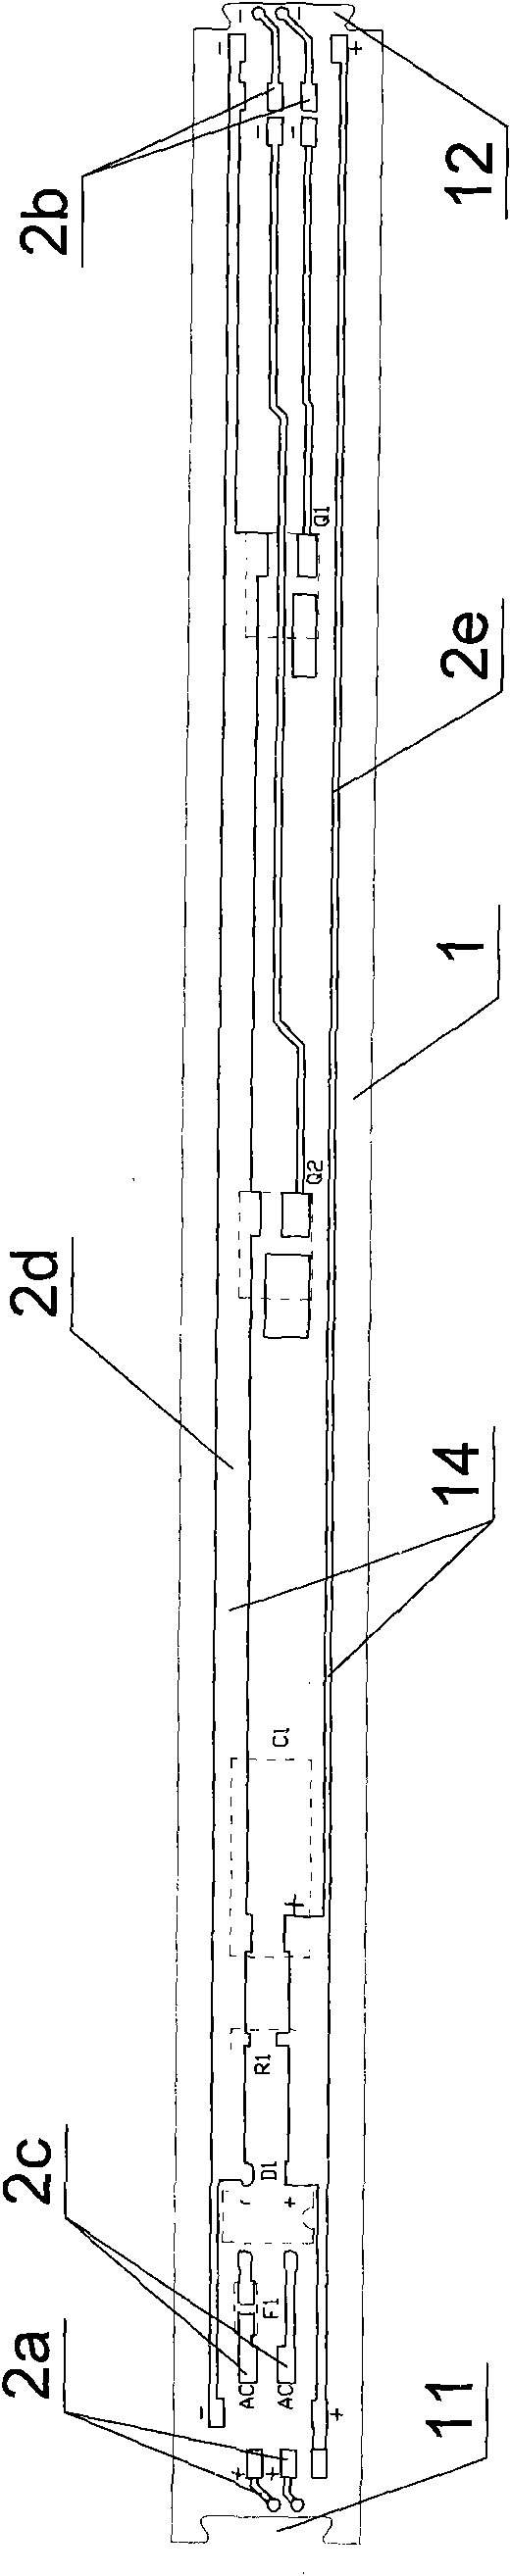 LED lamp circuit board for integrating light source and power supply and manufacture method thereof